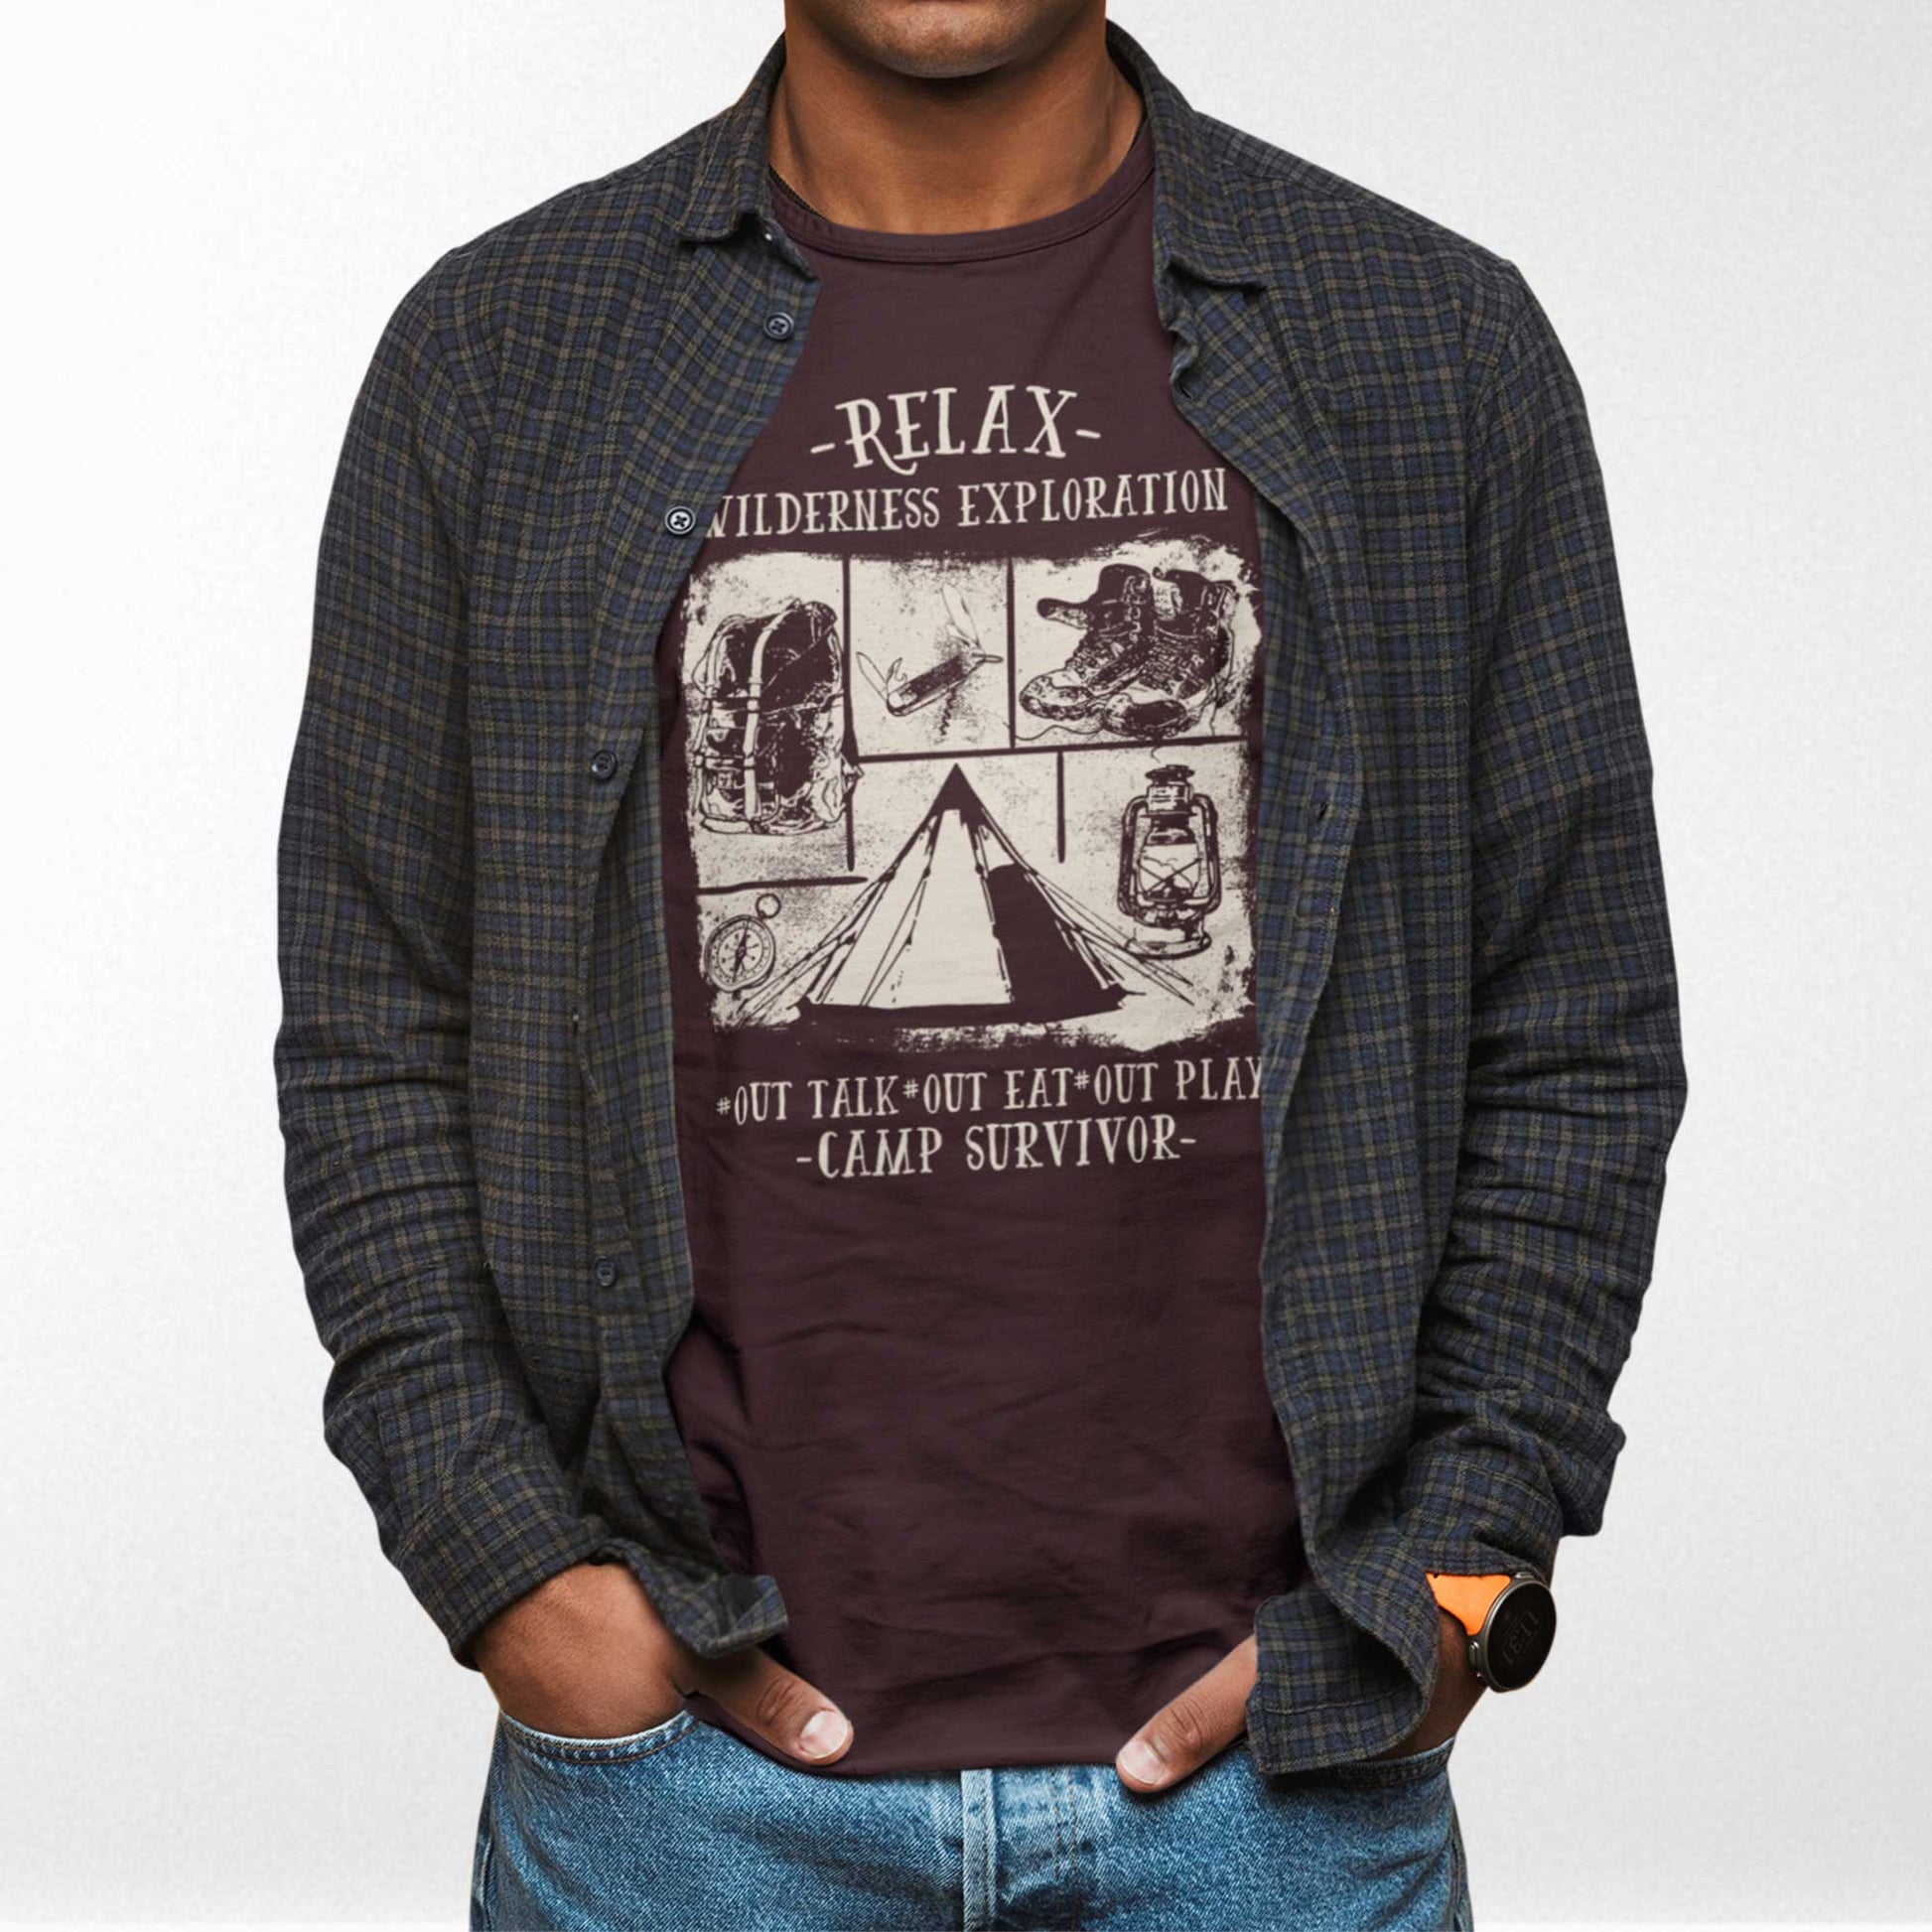 A man wearing an oxblood black Bella Canvas t-shirt featuring camping images with the words relax wilderness exploration, out talk, out eat, out play, camp survivor.